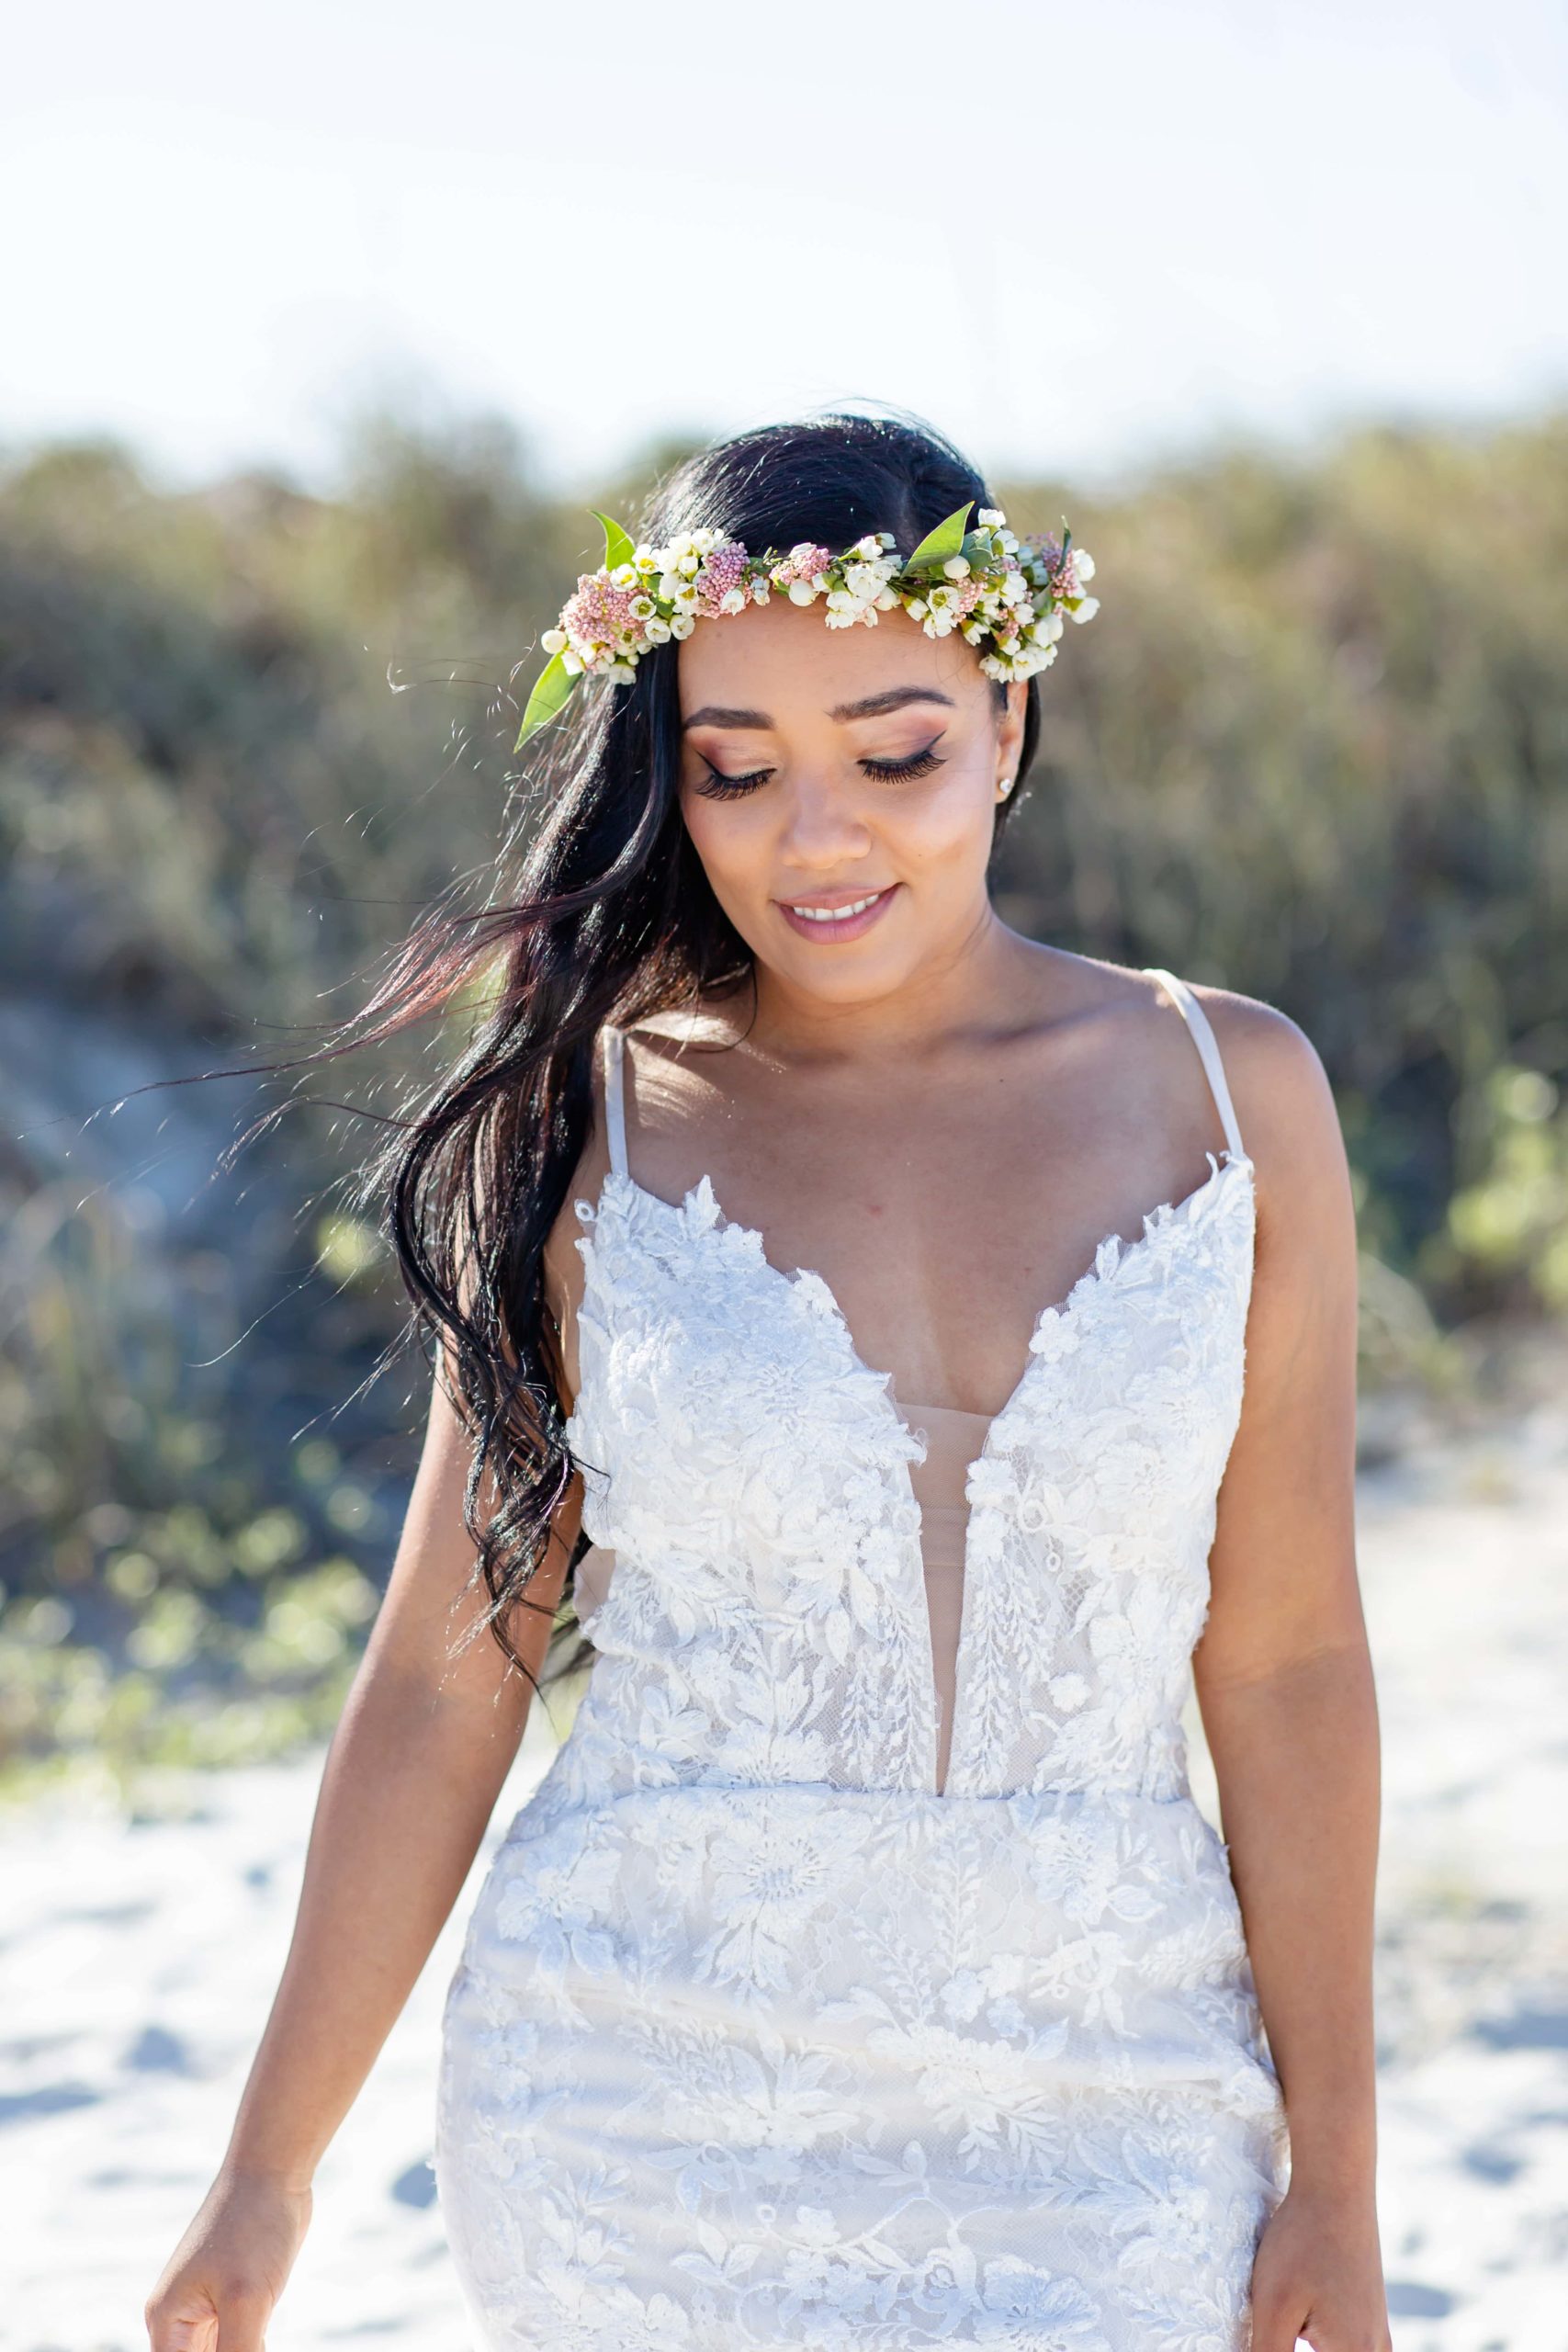 Beach Wedding Dress with lace detail and bridal flower crown